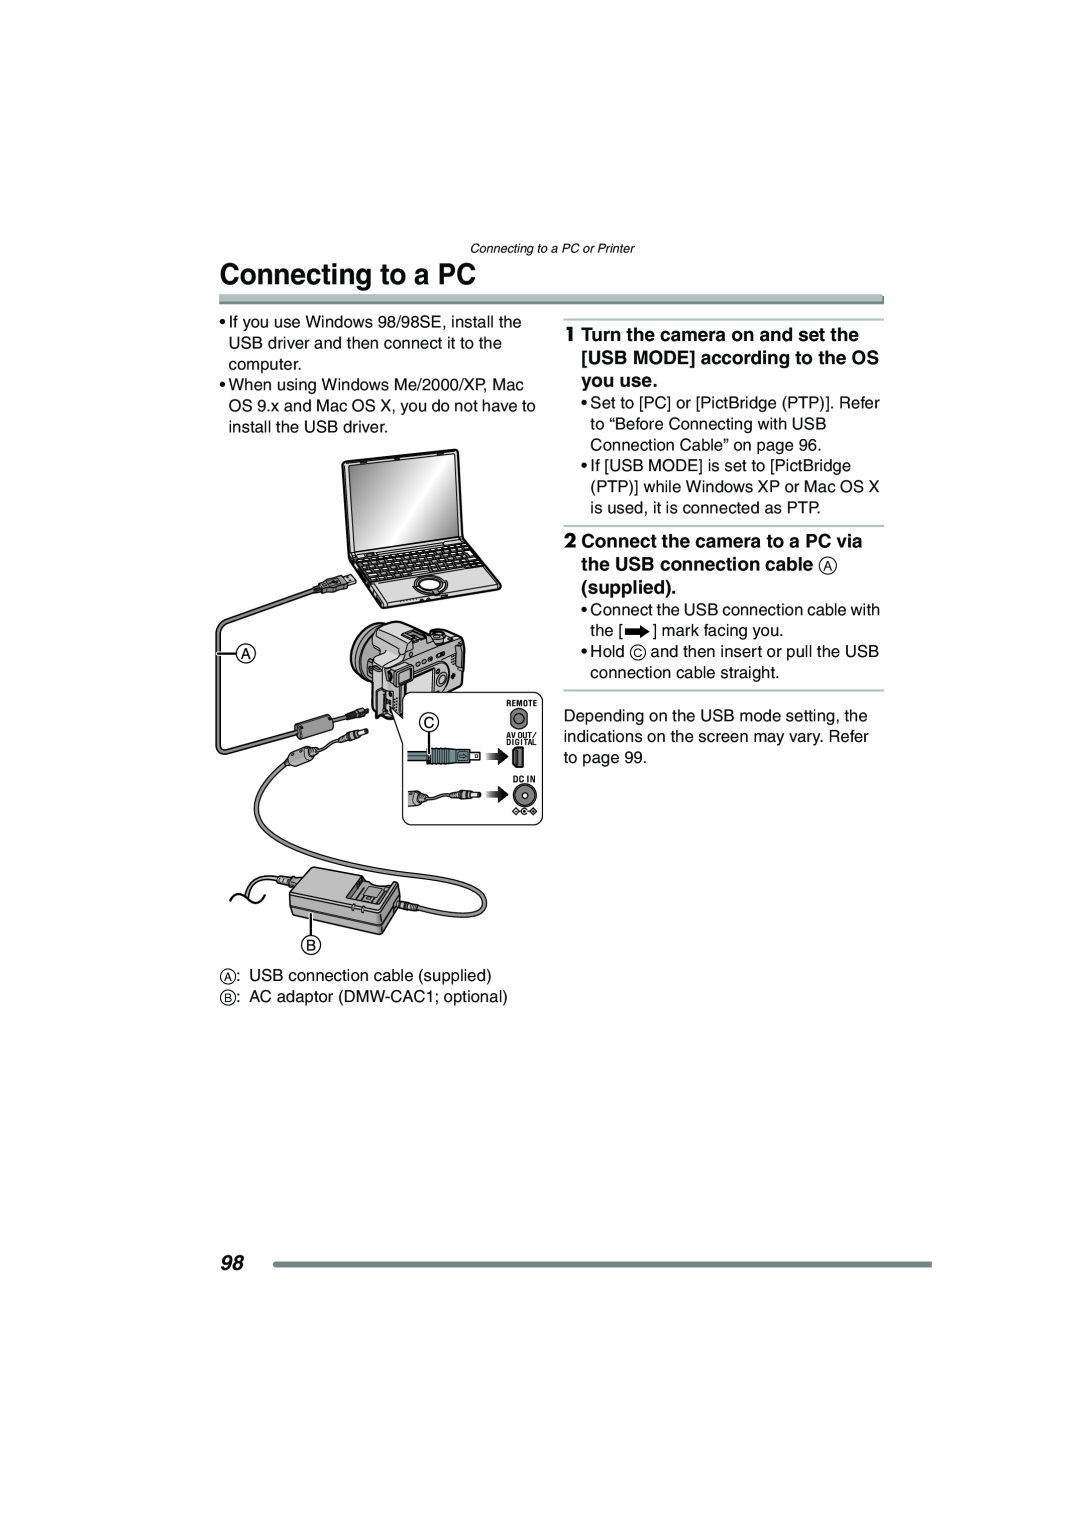 Panasonic DMC-FZ20PP Connecting to a PC, Turn the camera on and set the USB MODE according to the OS you use 